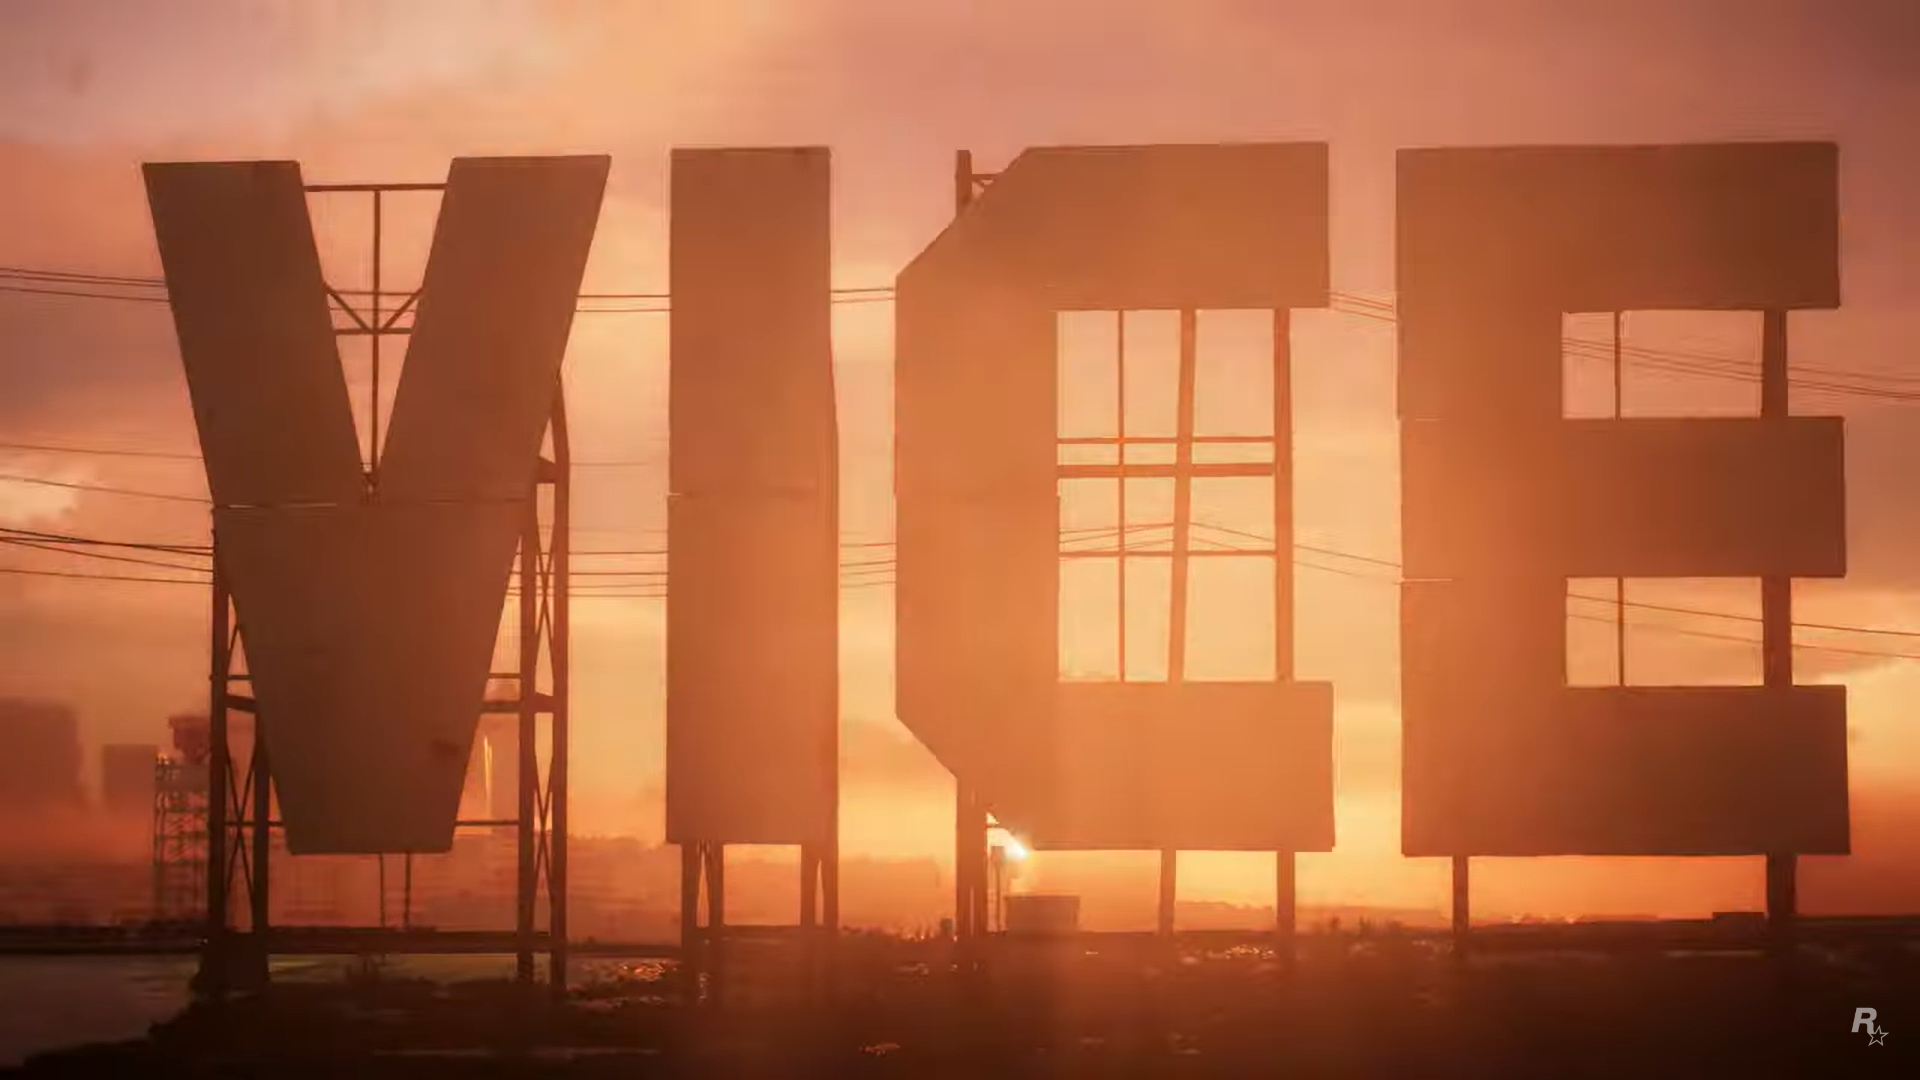 GTA 6 trailer: fast cars, flamingos and a female lead revealed in